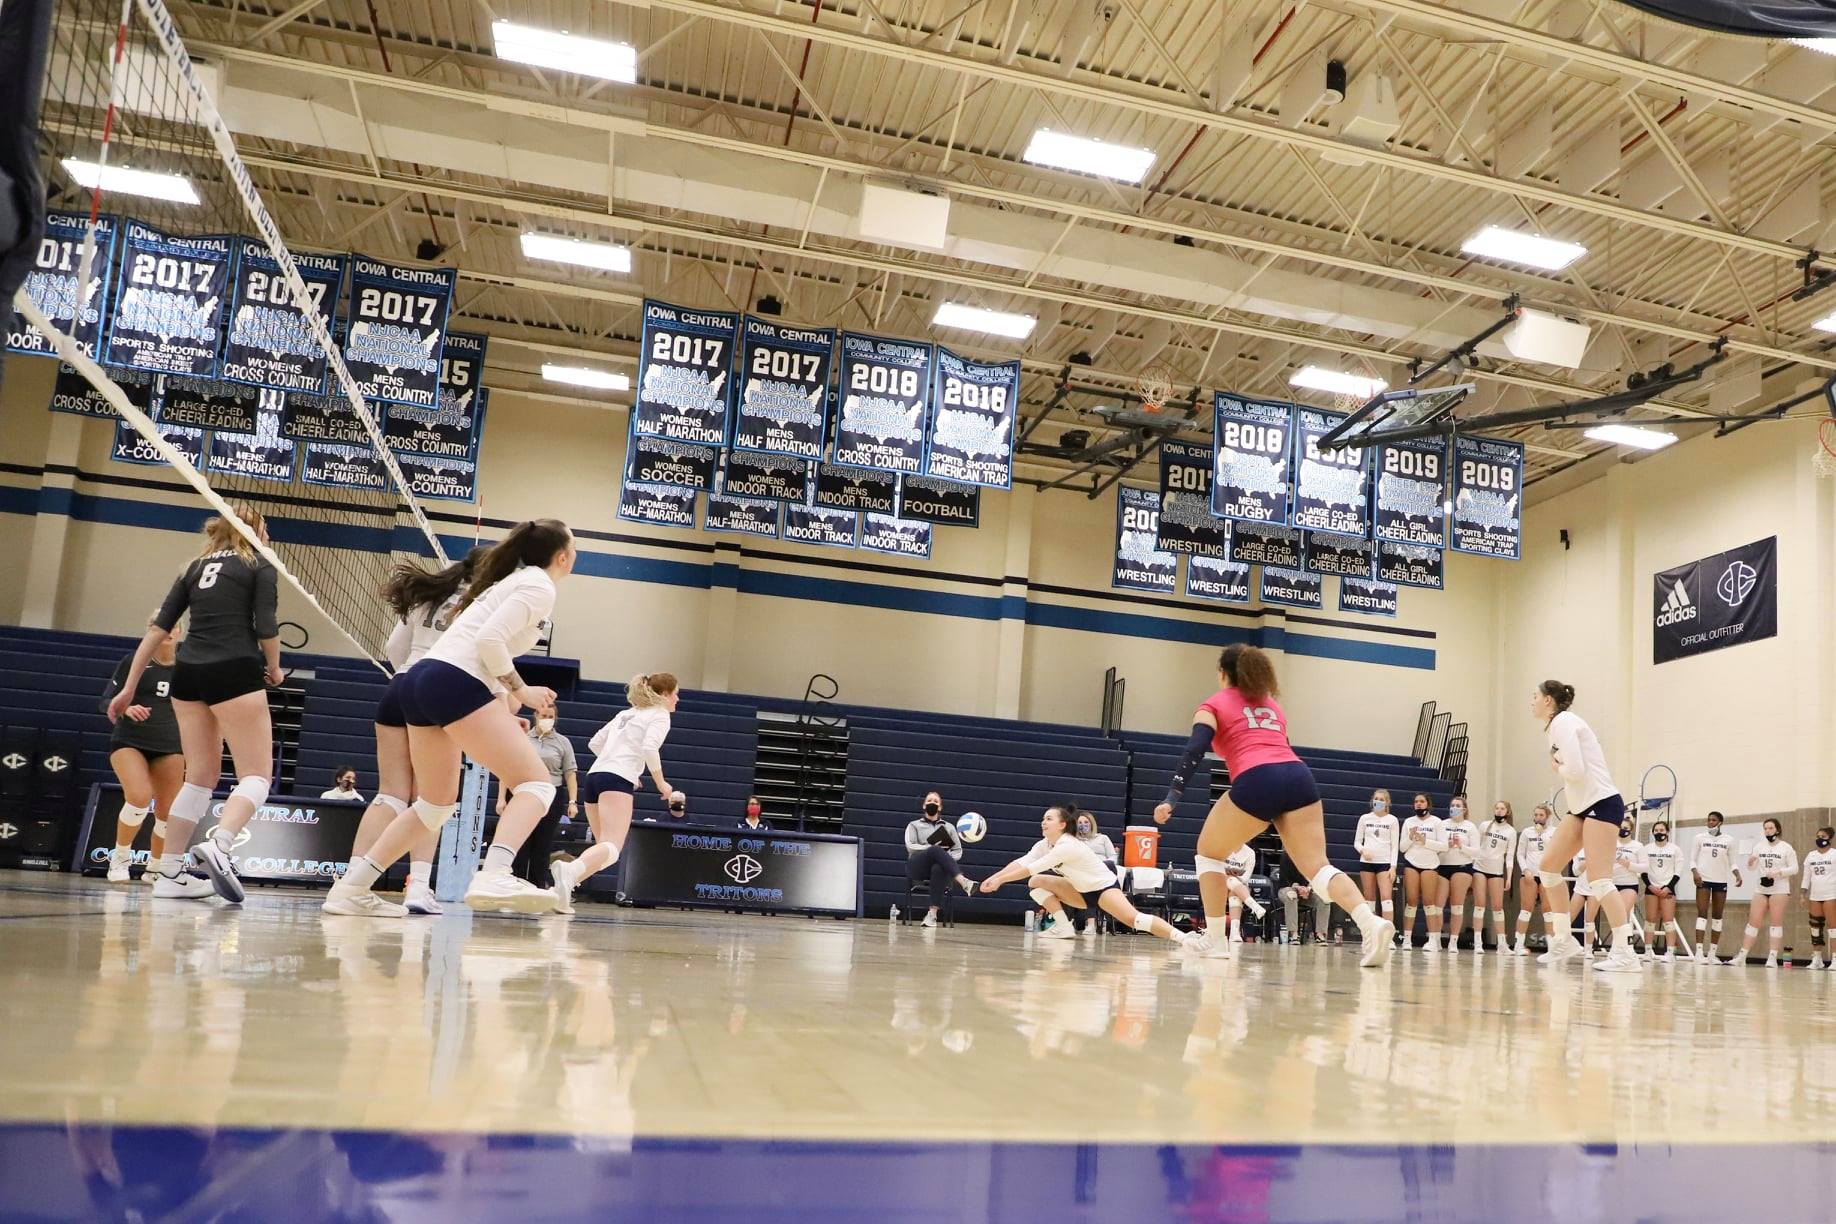 Tritons move to 3-0 with sweep of Bears